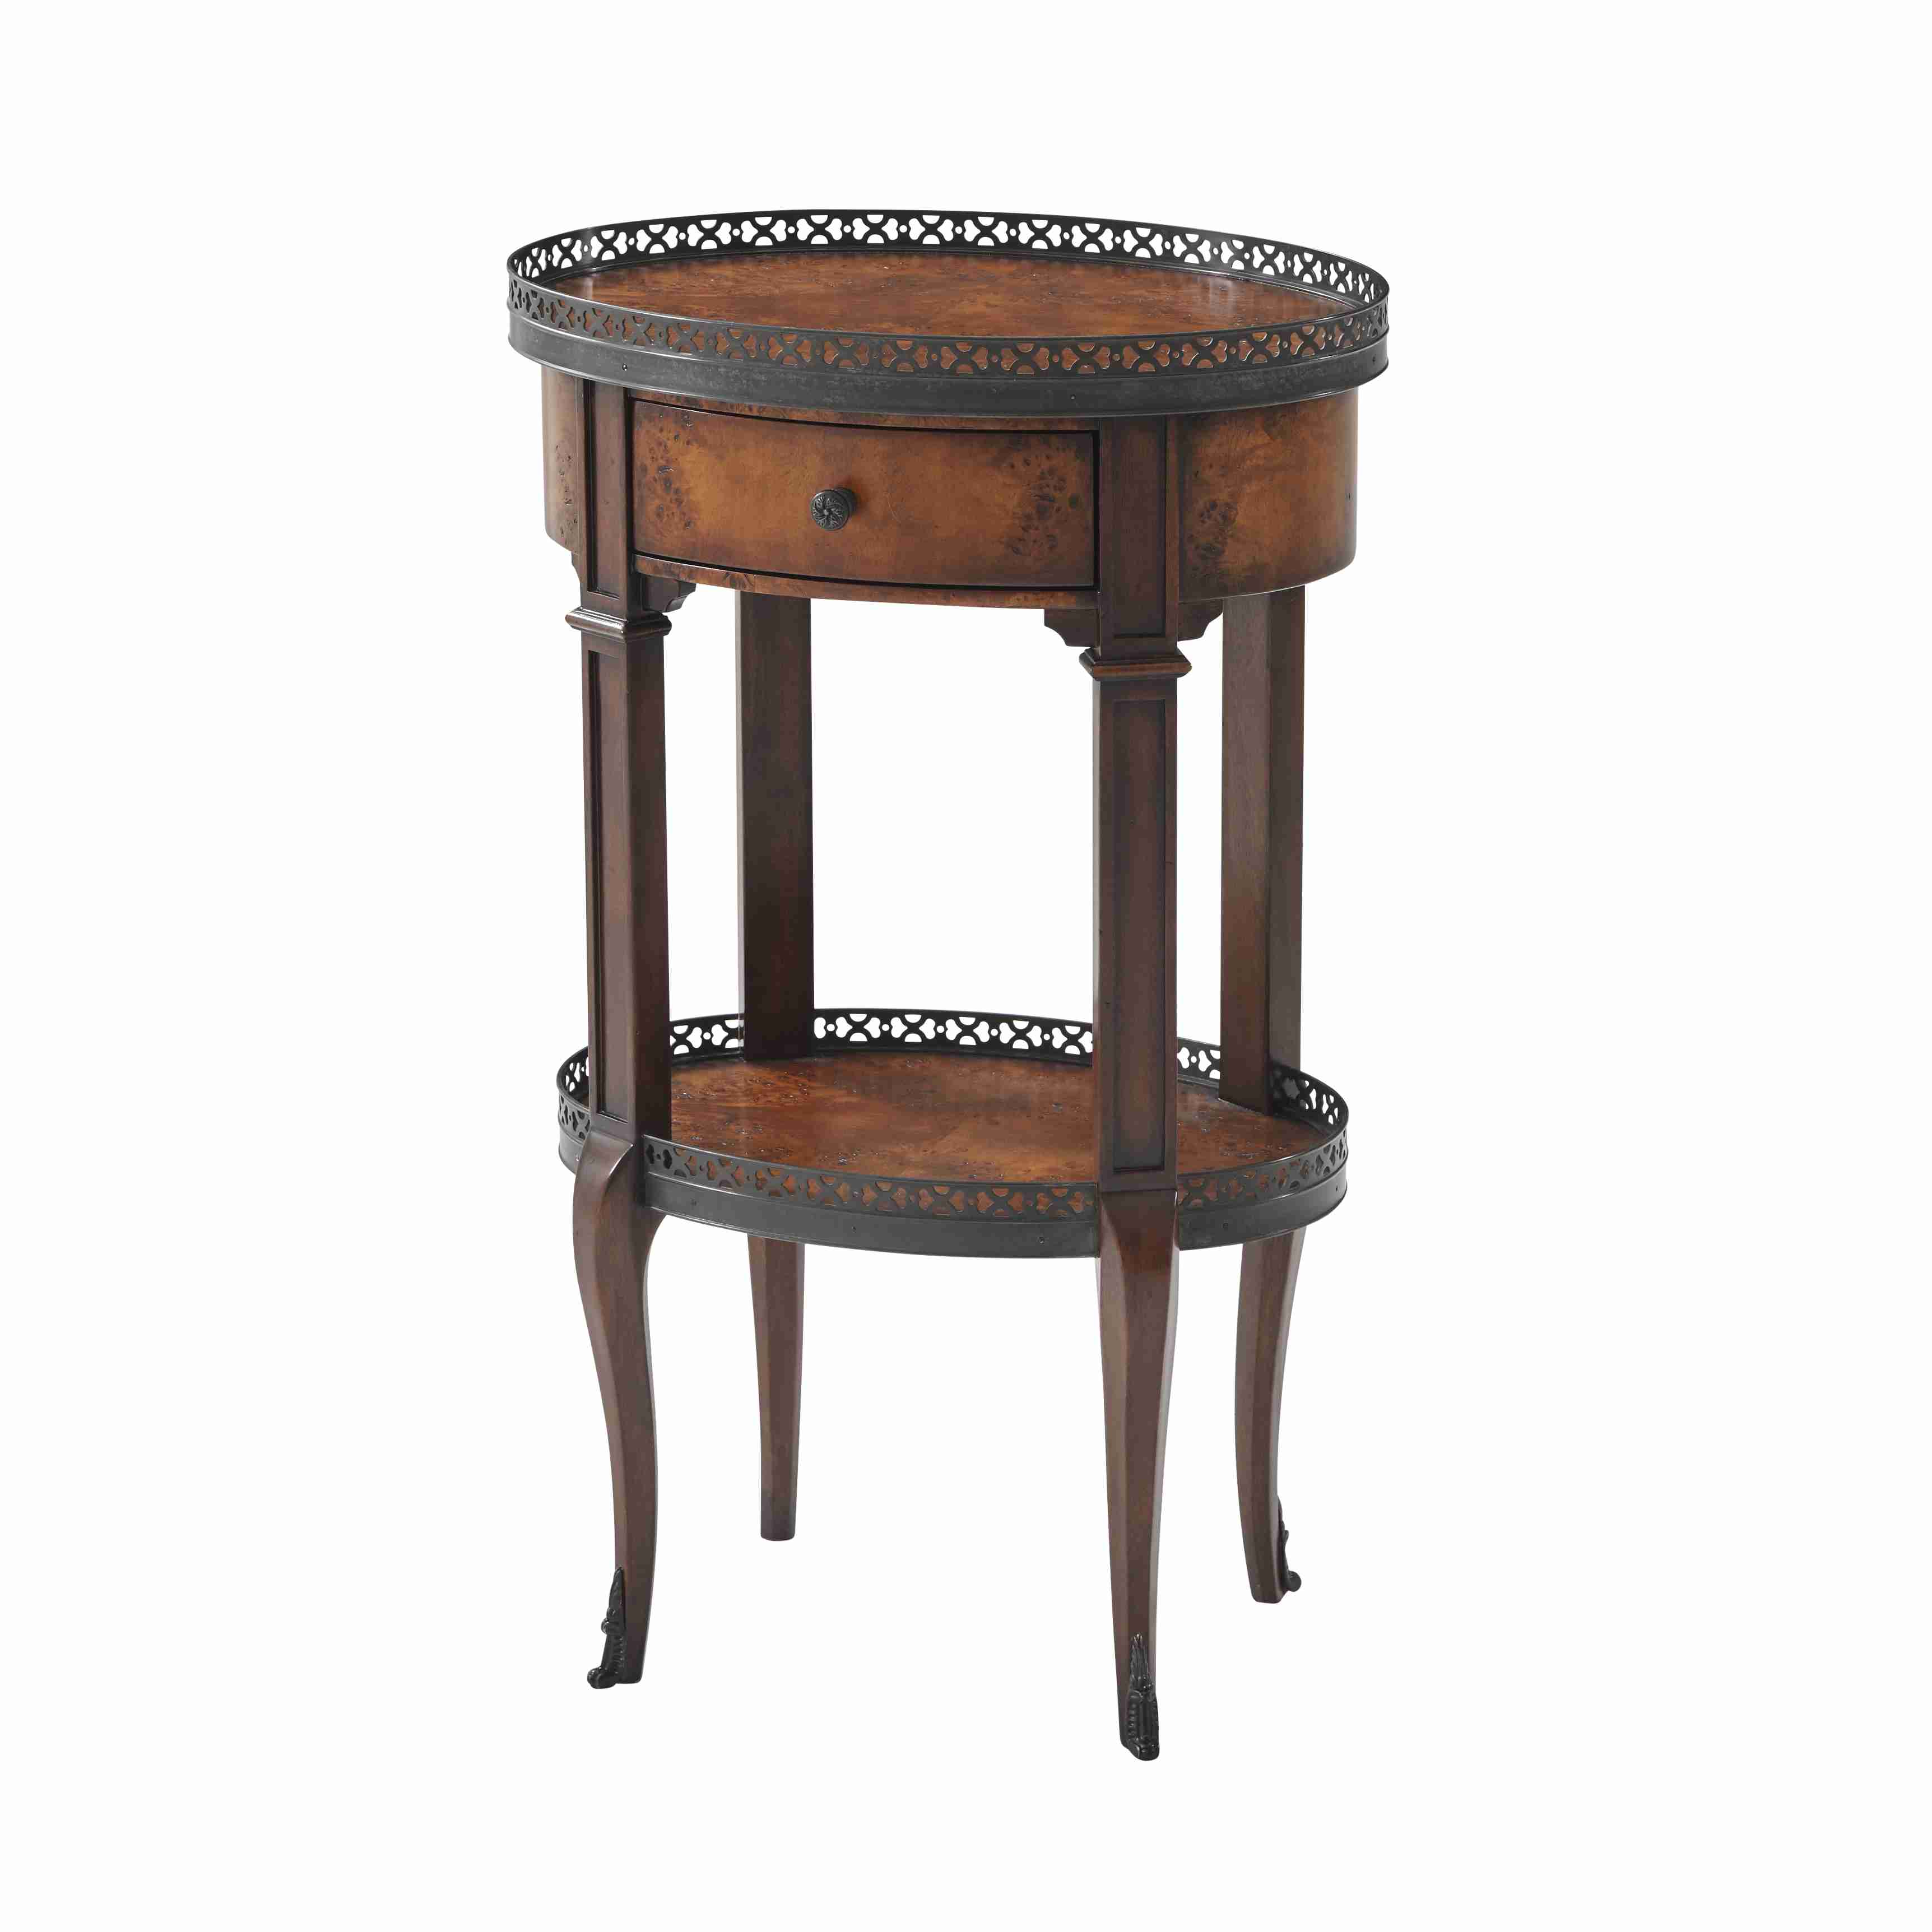 DELICATE AND PIERCED ACCENT TABLE